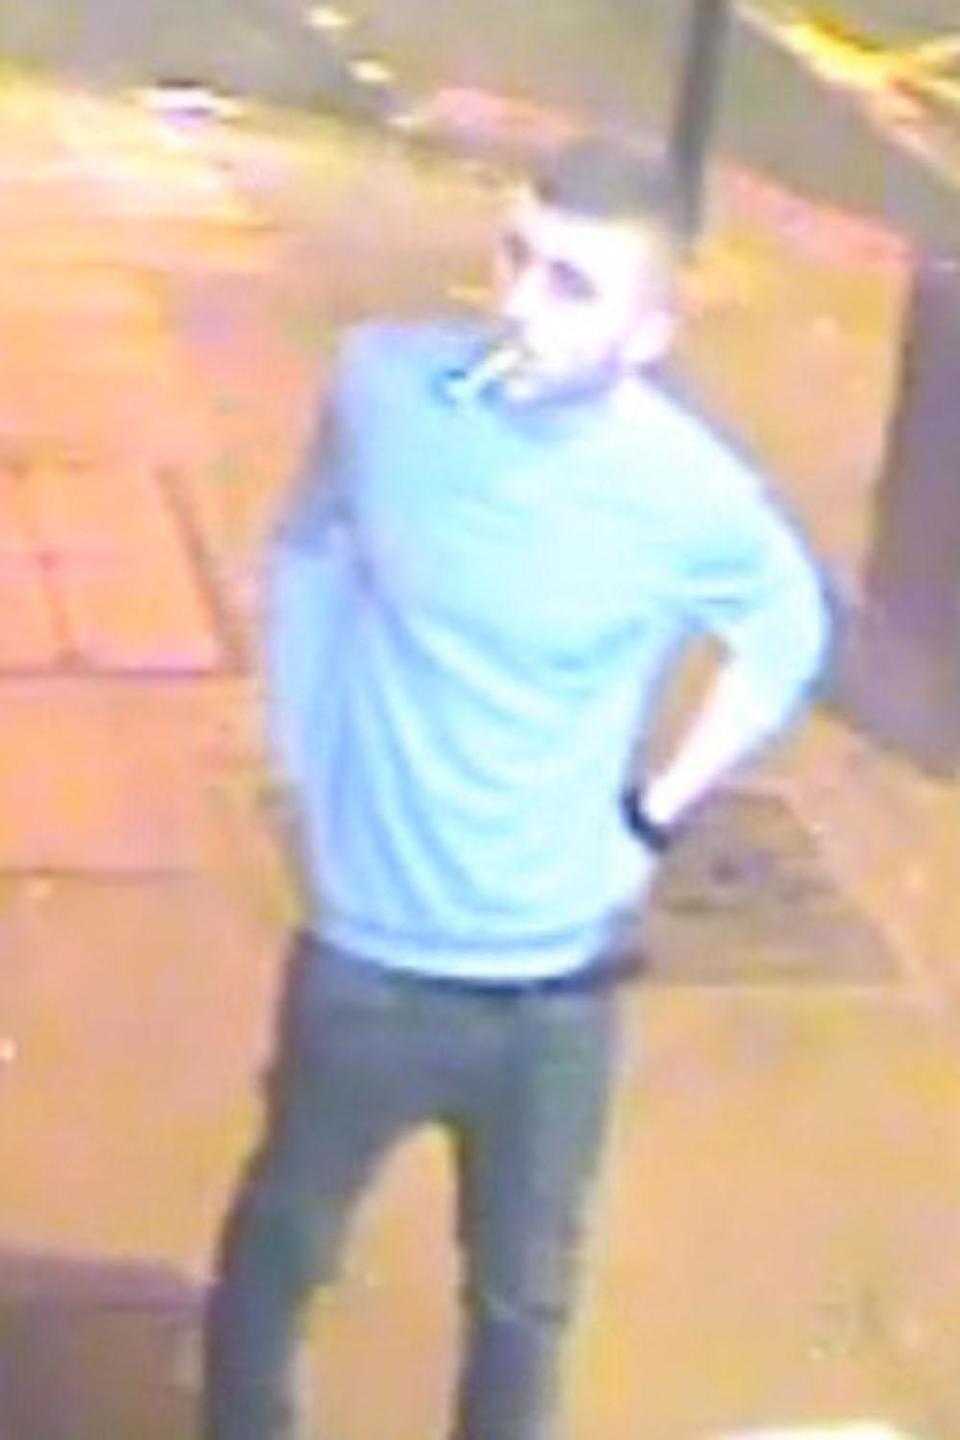 Suspect: Police have released an image of a man they would like to speak with in connection with the incident (Metropolitan Police)